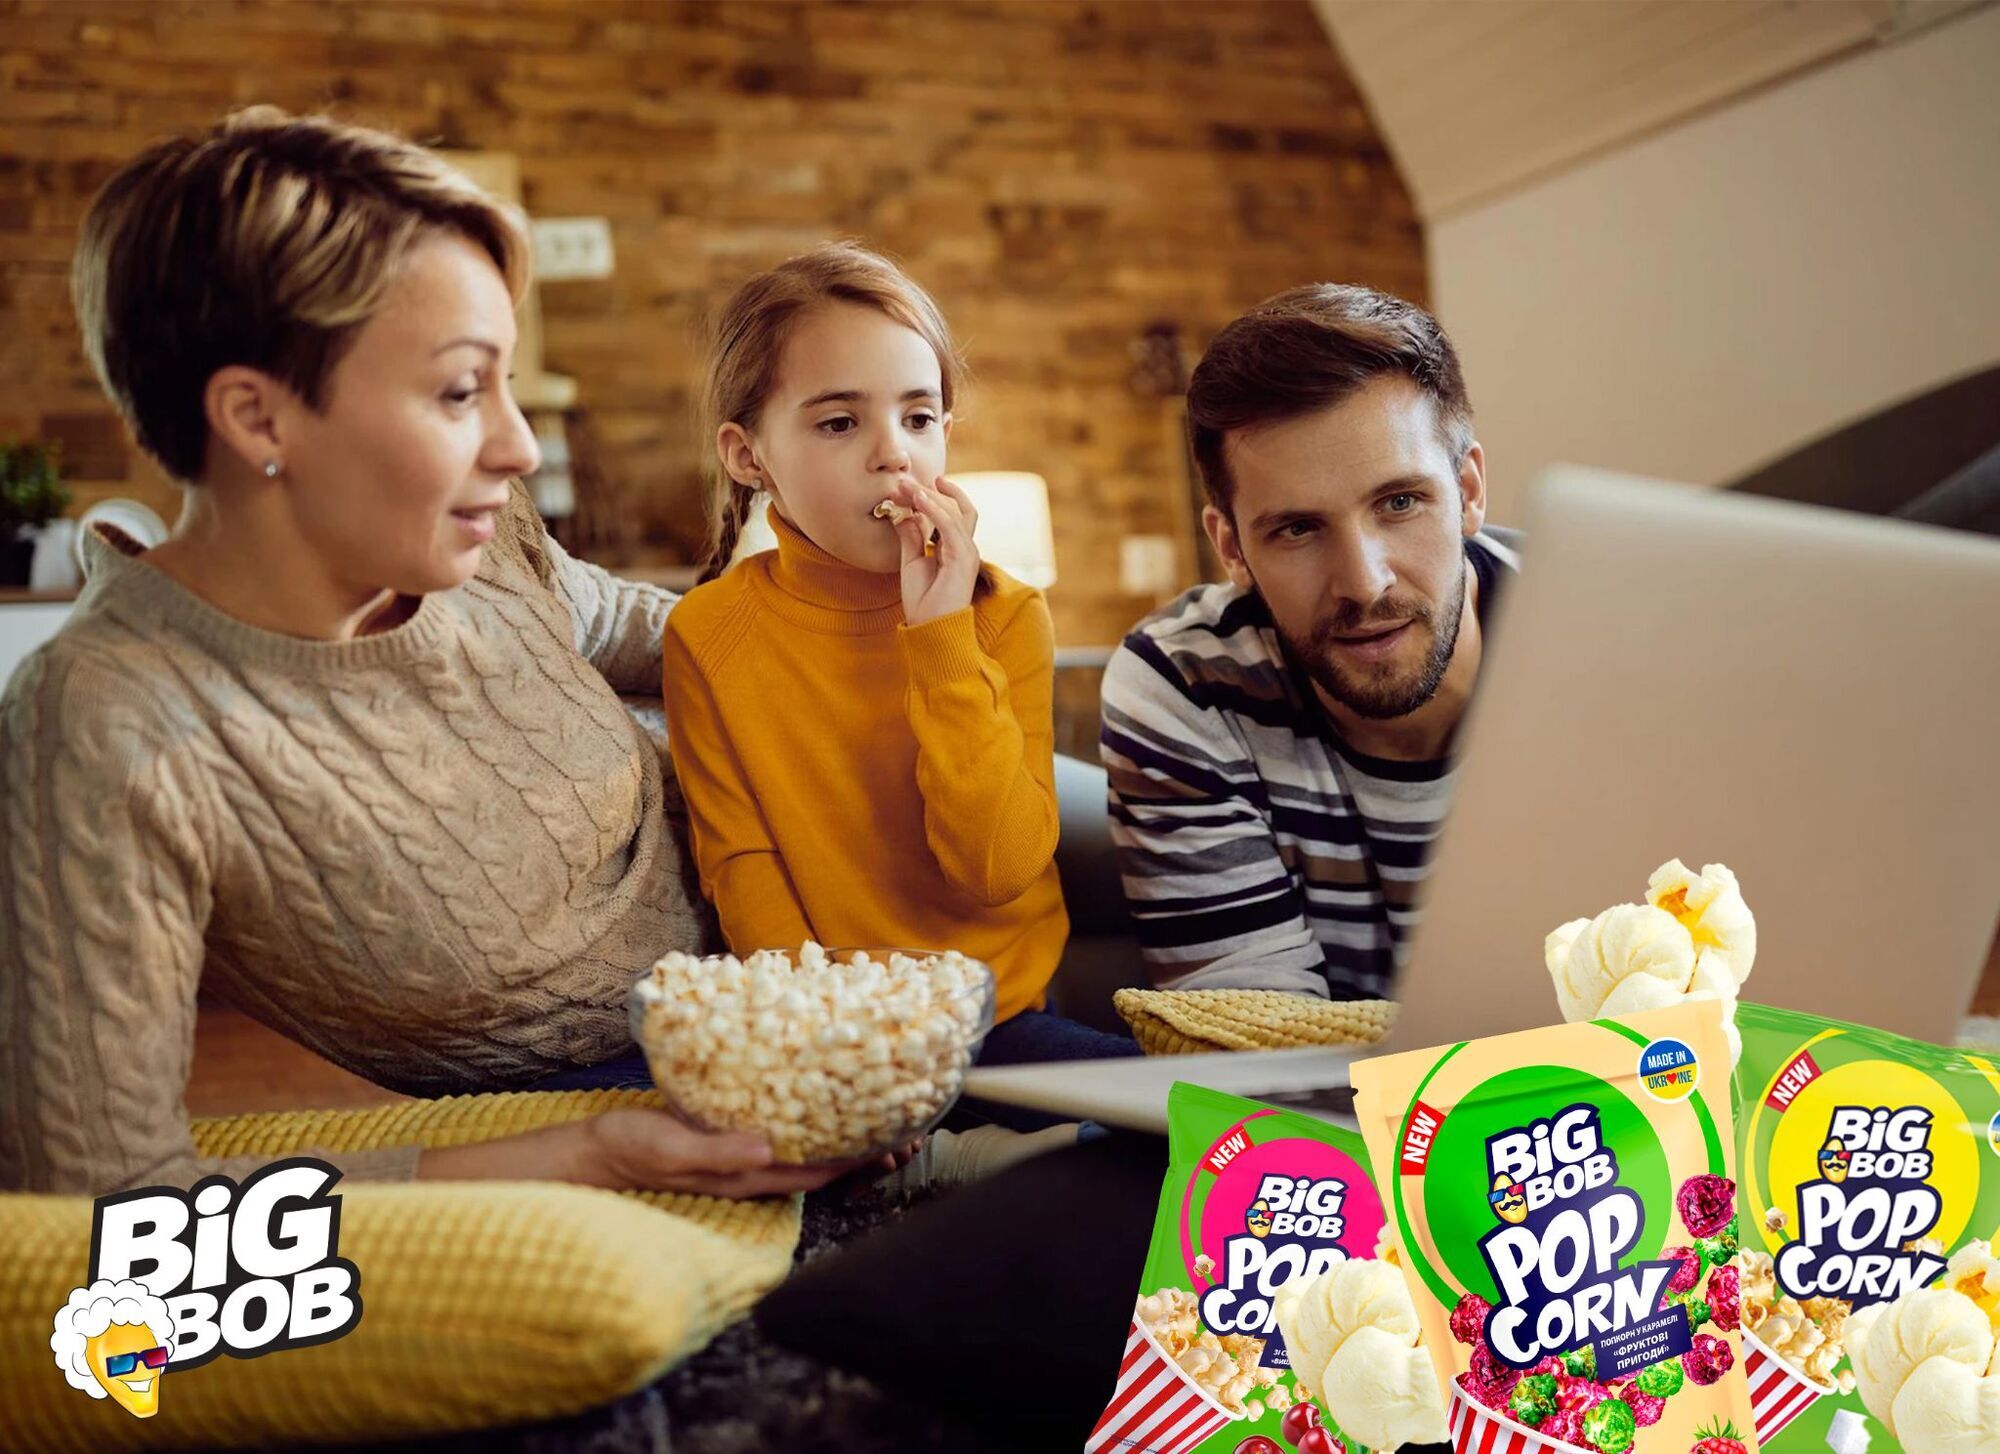 5 ideas for fun and tasty time with kids: get inspired by Big Bob's sweet popcorn